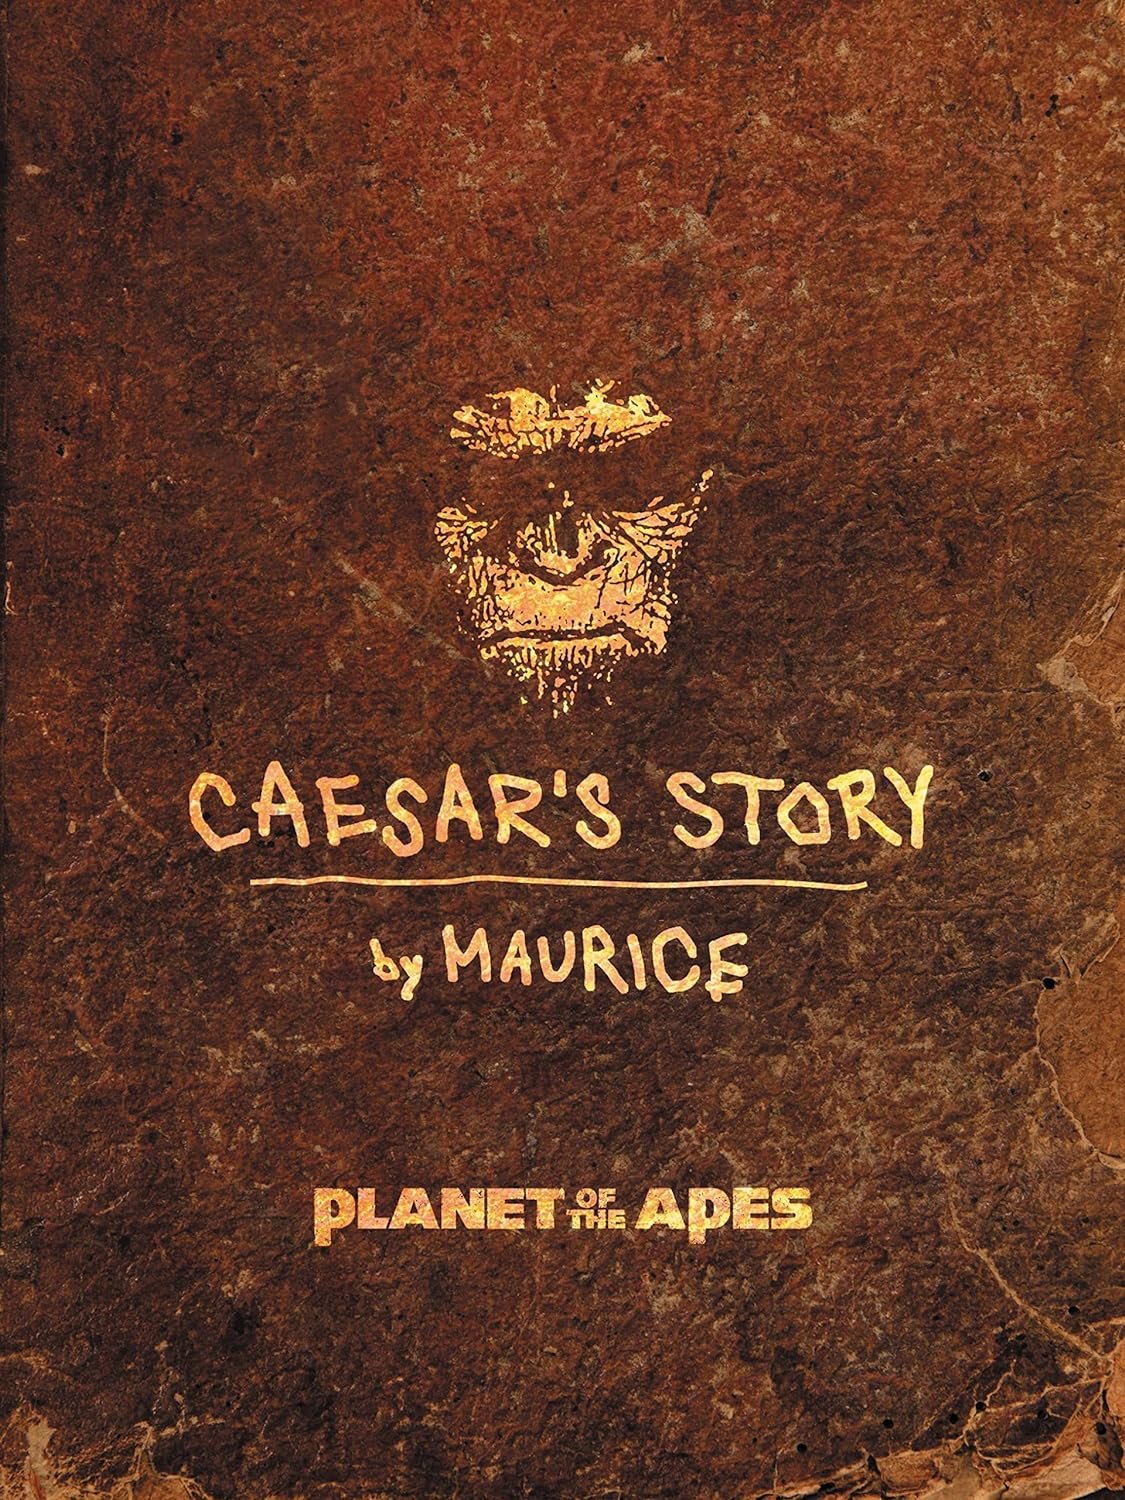 Old worn book cover titled "Planet of the Apes: Caesar's Story by Maurice" with an embossed image of a contemplative ape wearing a crown, from the "Planet of the Apes" movie series.